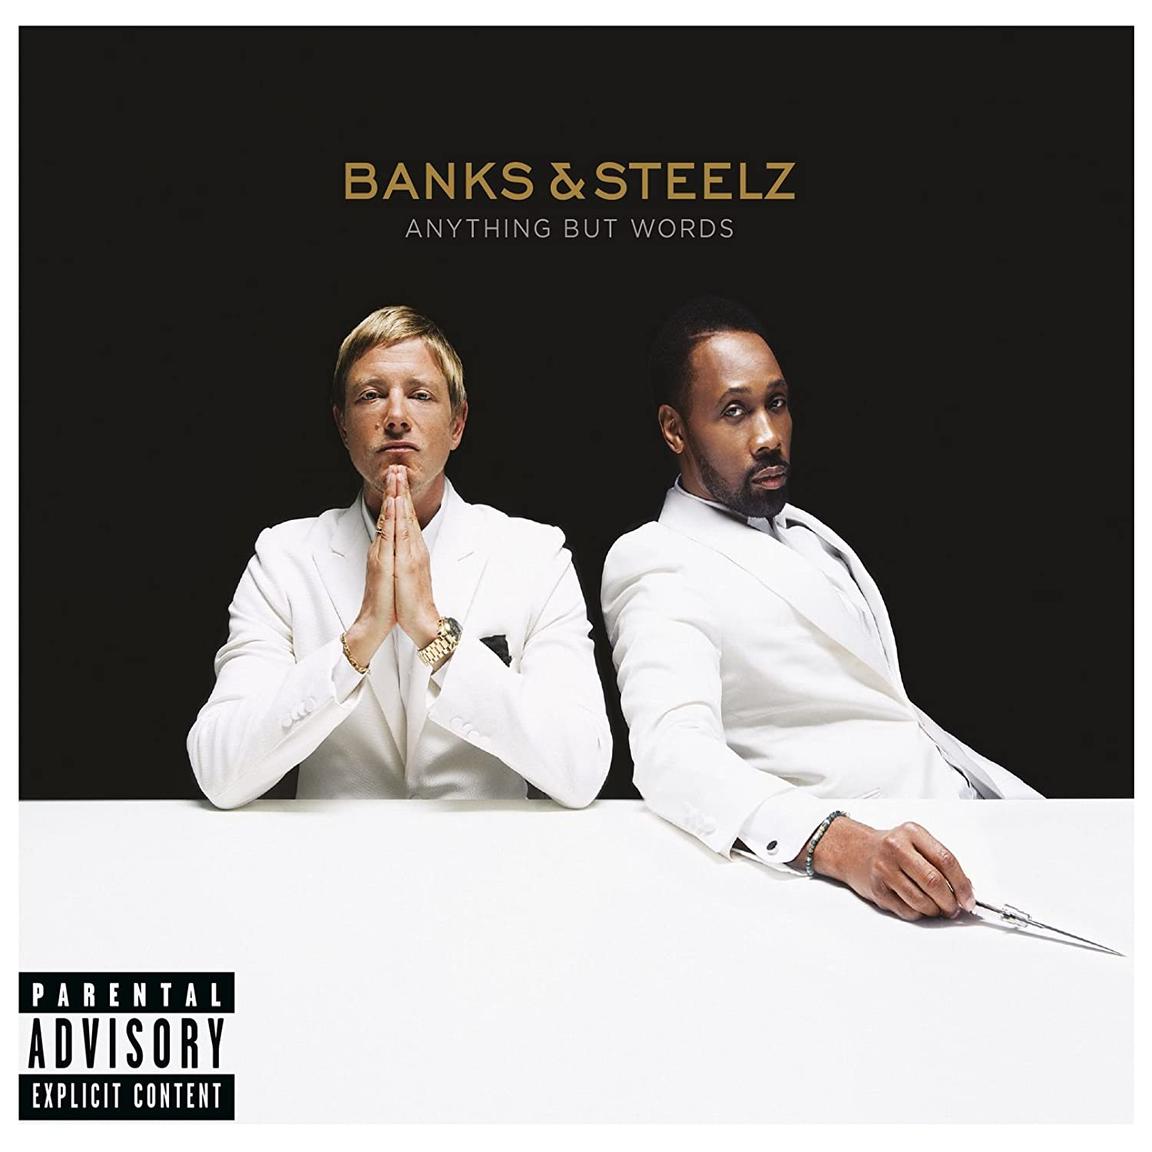 Banks & Steelz / Anything But Words